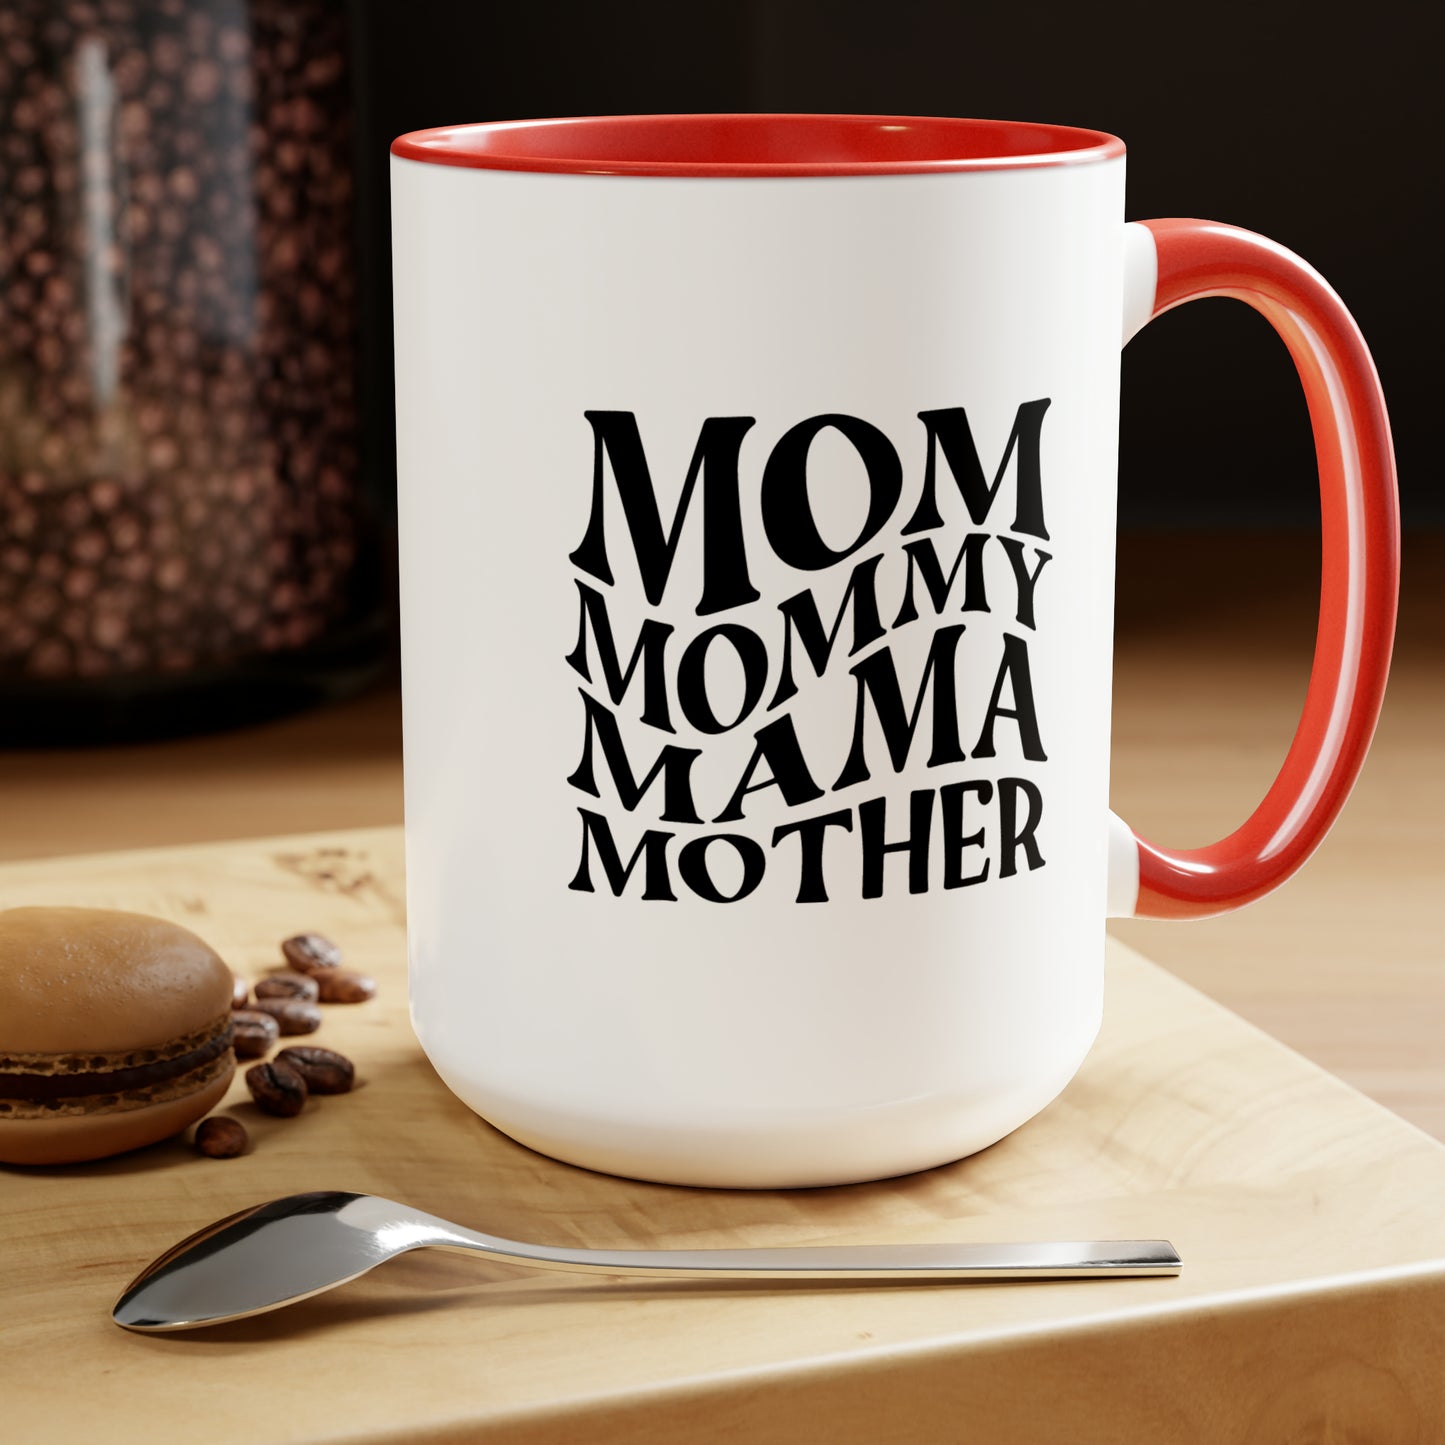 15oz Two-Tone Ceramic Mom Mug - Perfect Gift for Mothers3